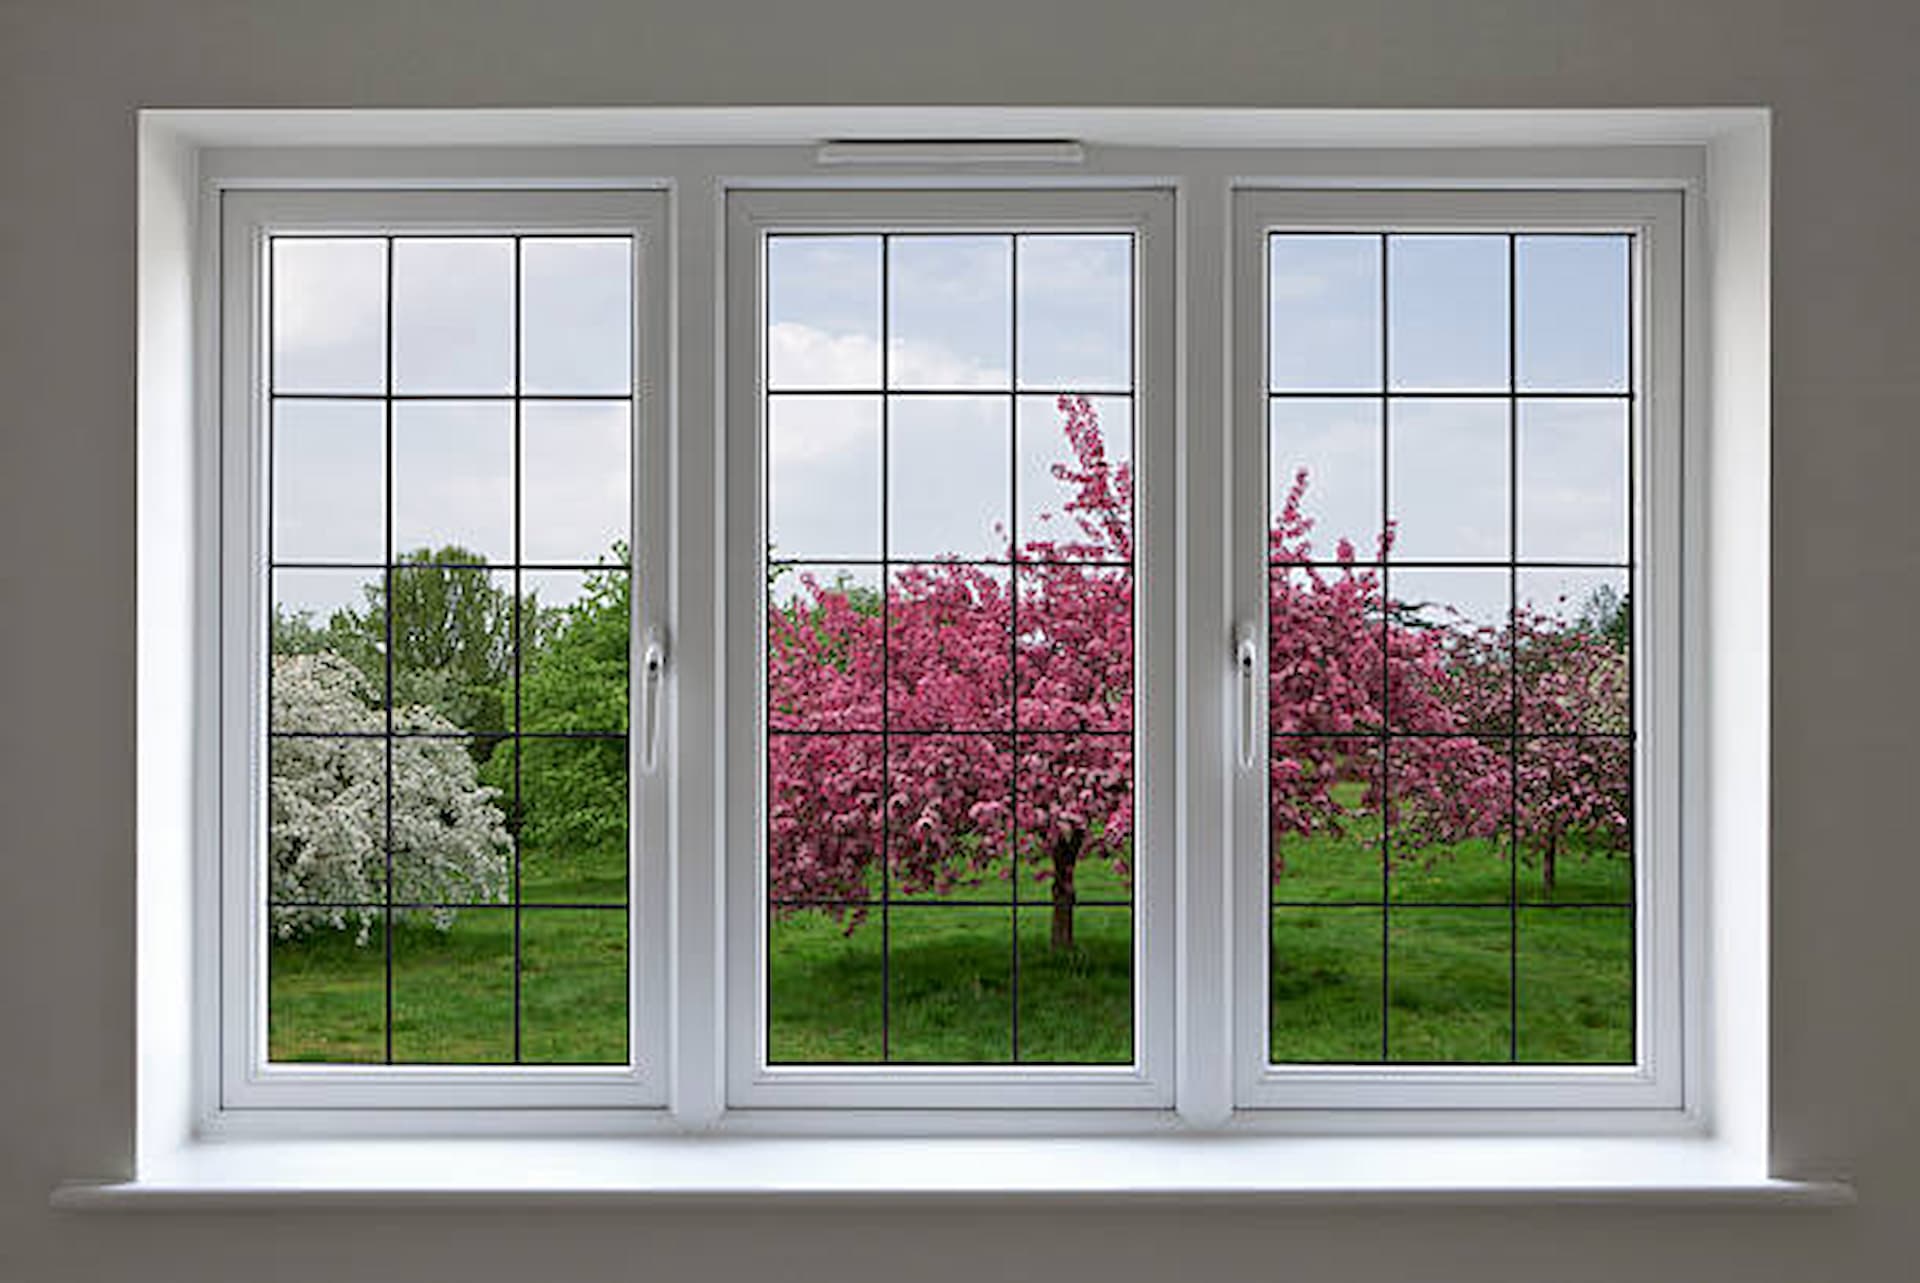 How Do Double Glazed Windows Benefit The Users?